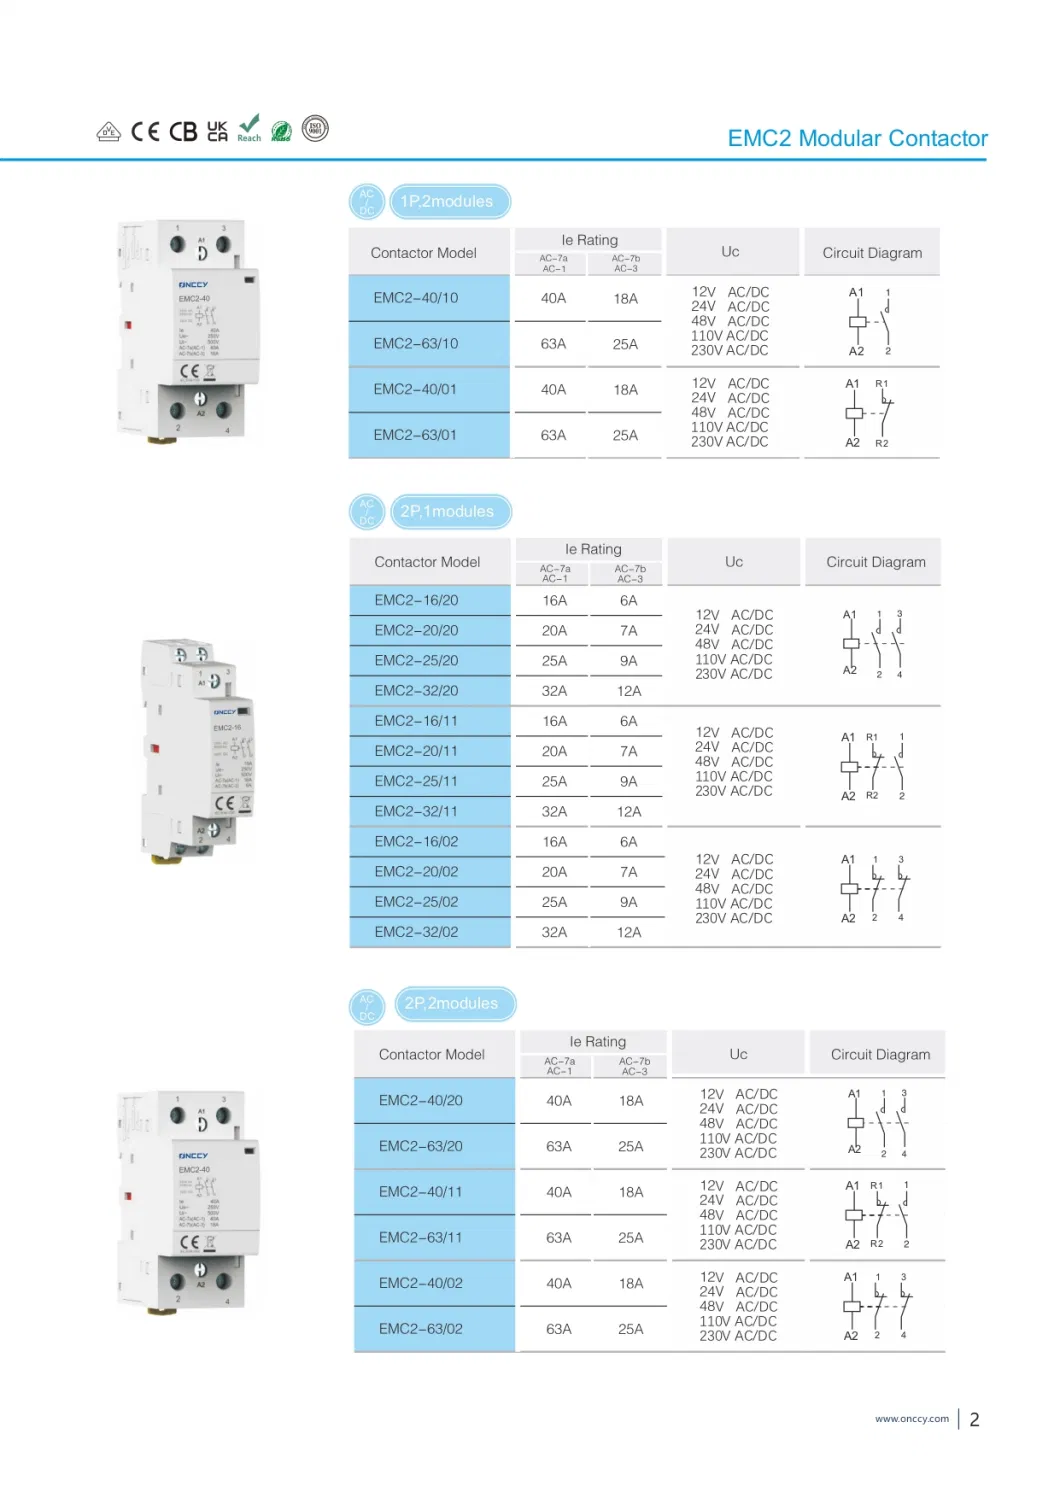 AC Modular Contactor 2 Pole 1, 2, 3modules 16A-125A for Solar PV, Battery Energy Storage